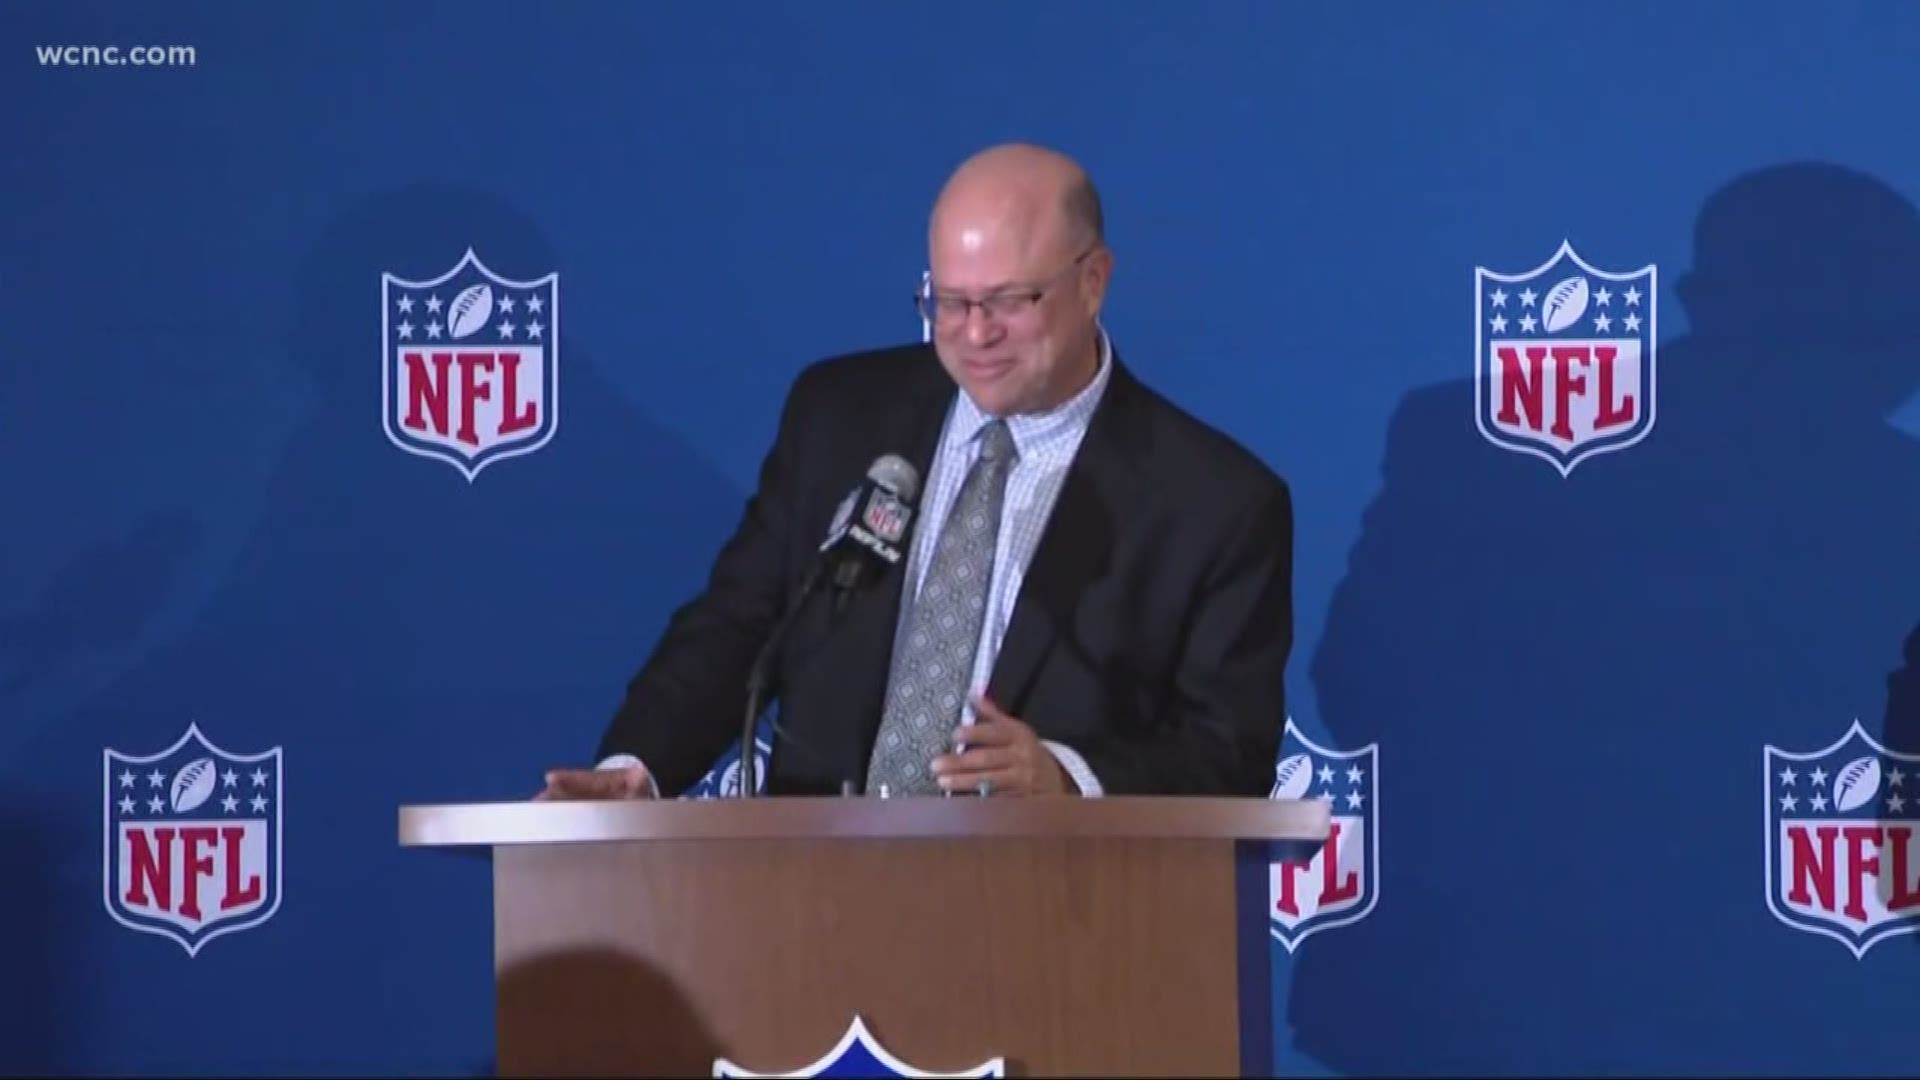 After being voted in as the next Panthers owner and attending the league meetings in Atlanta, David Tepper flew to the Queen City to discuss the NFL's new national anthem policy with team captain and leaders.